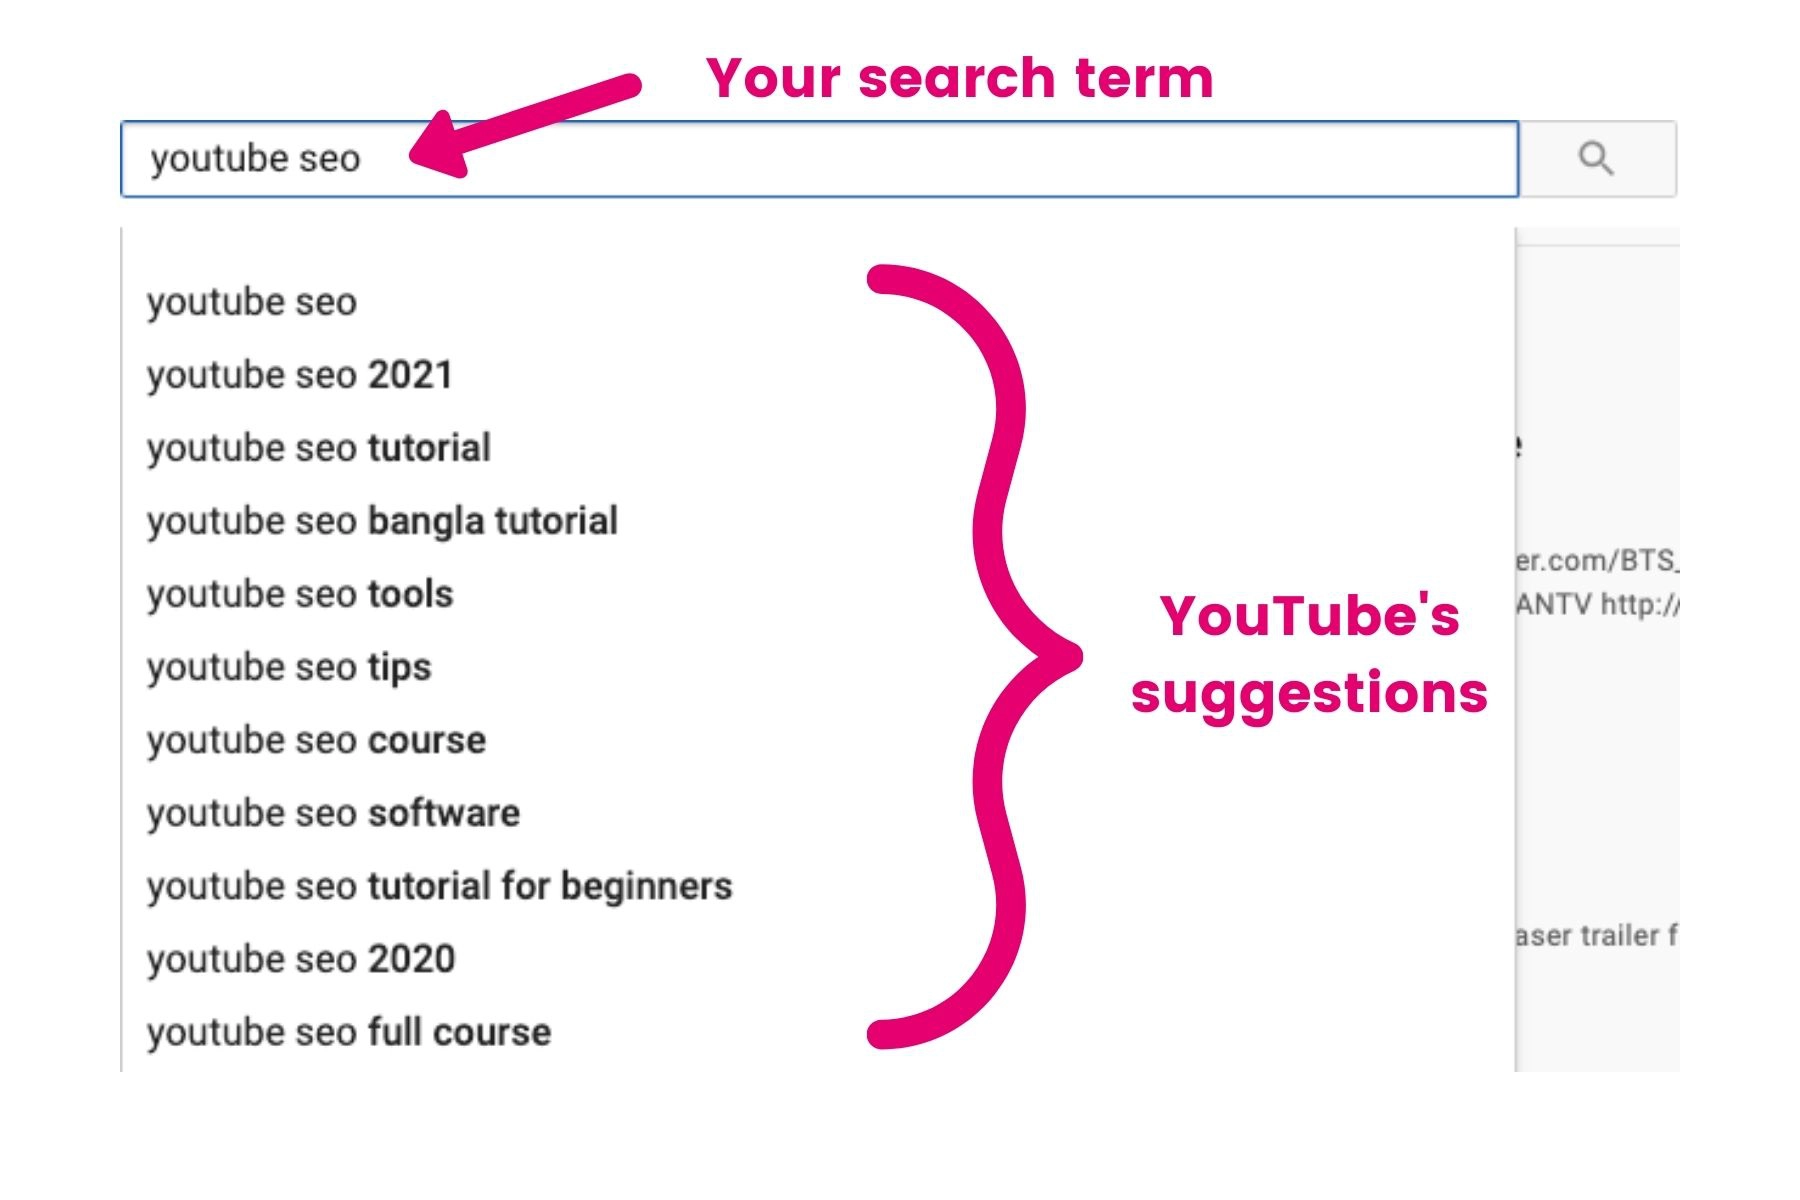 YouTube search box with the term "youtube seo" in the search bar and suggestions underneath such as "youtube seo 2021," "youtube seo tutorial," and "youtube seo tools."